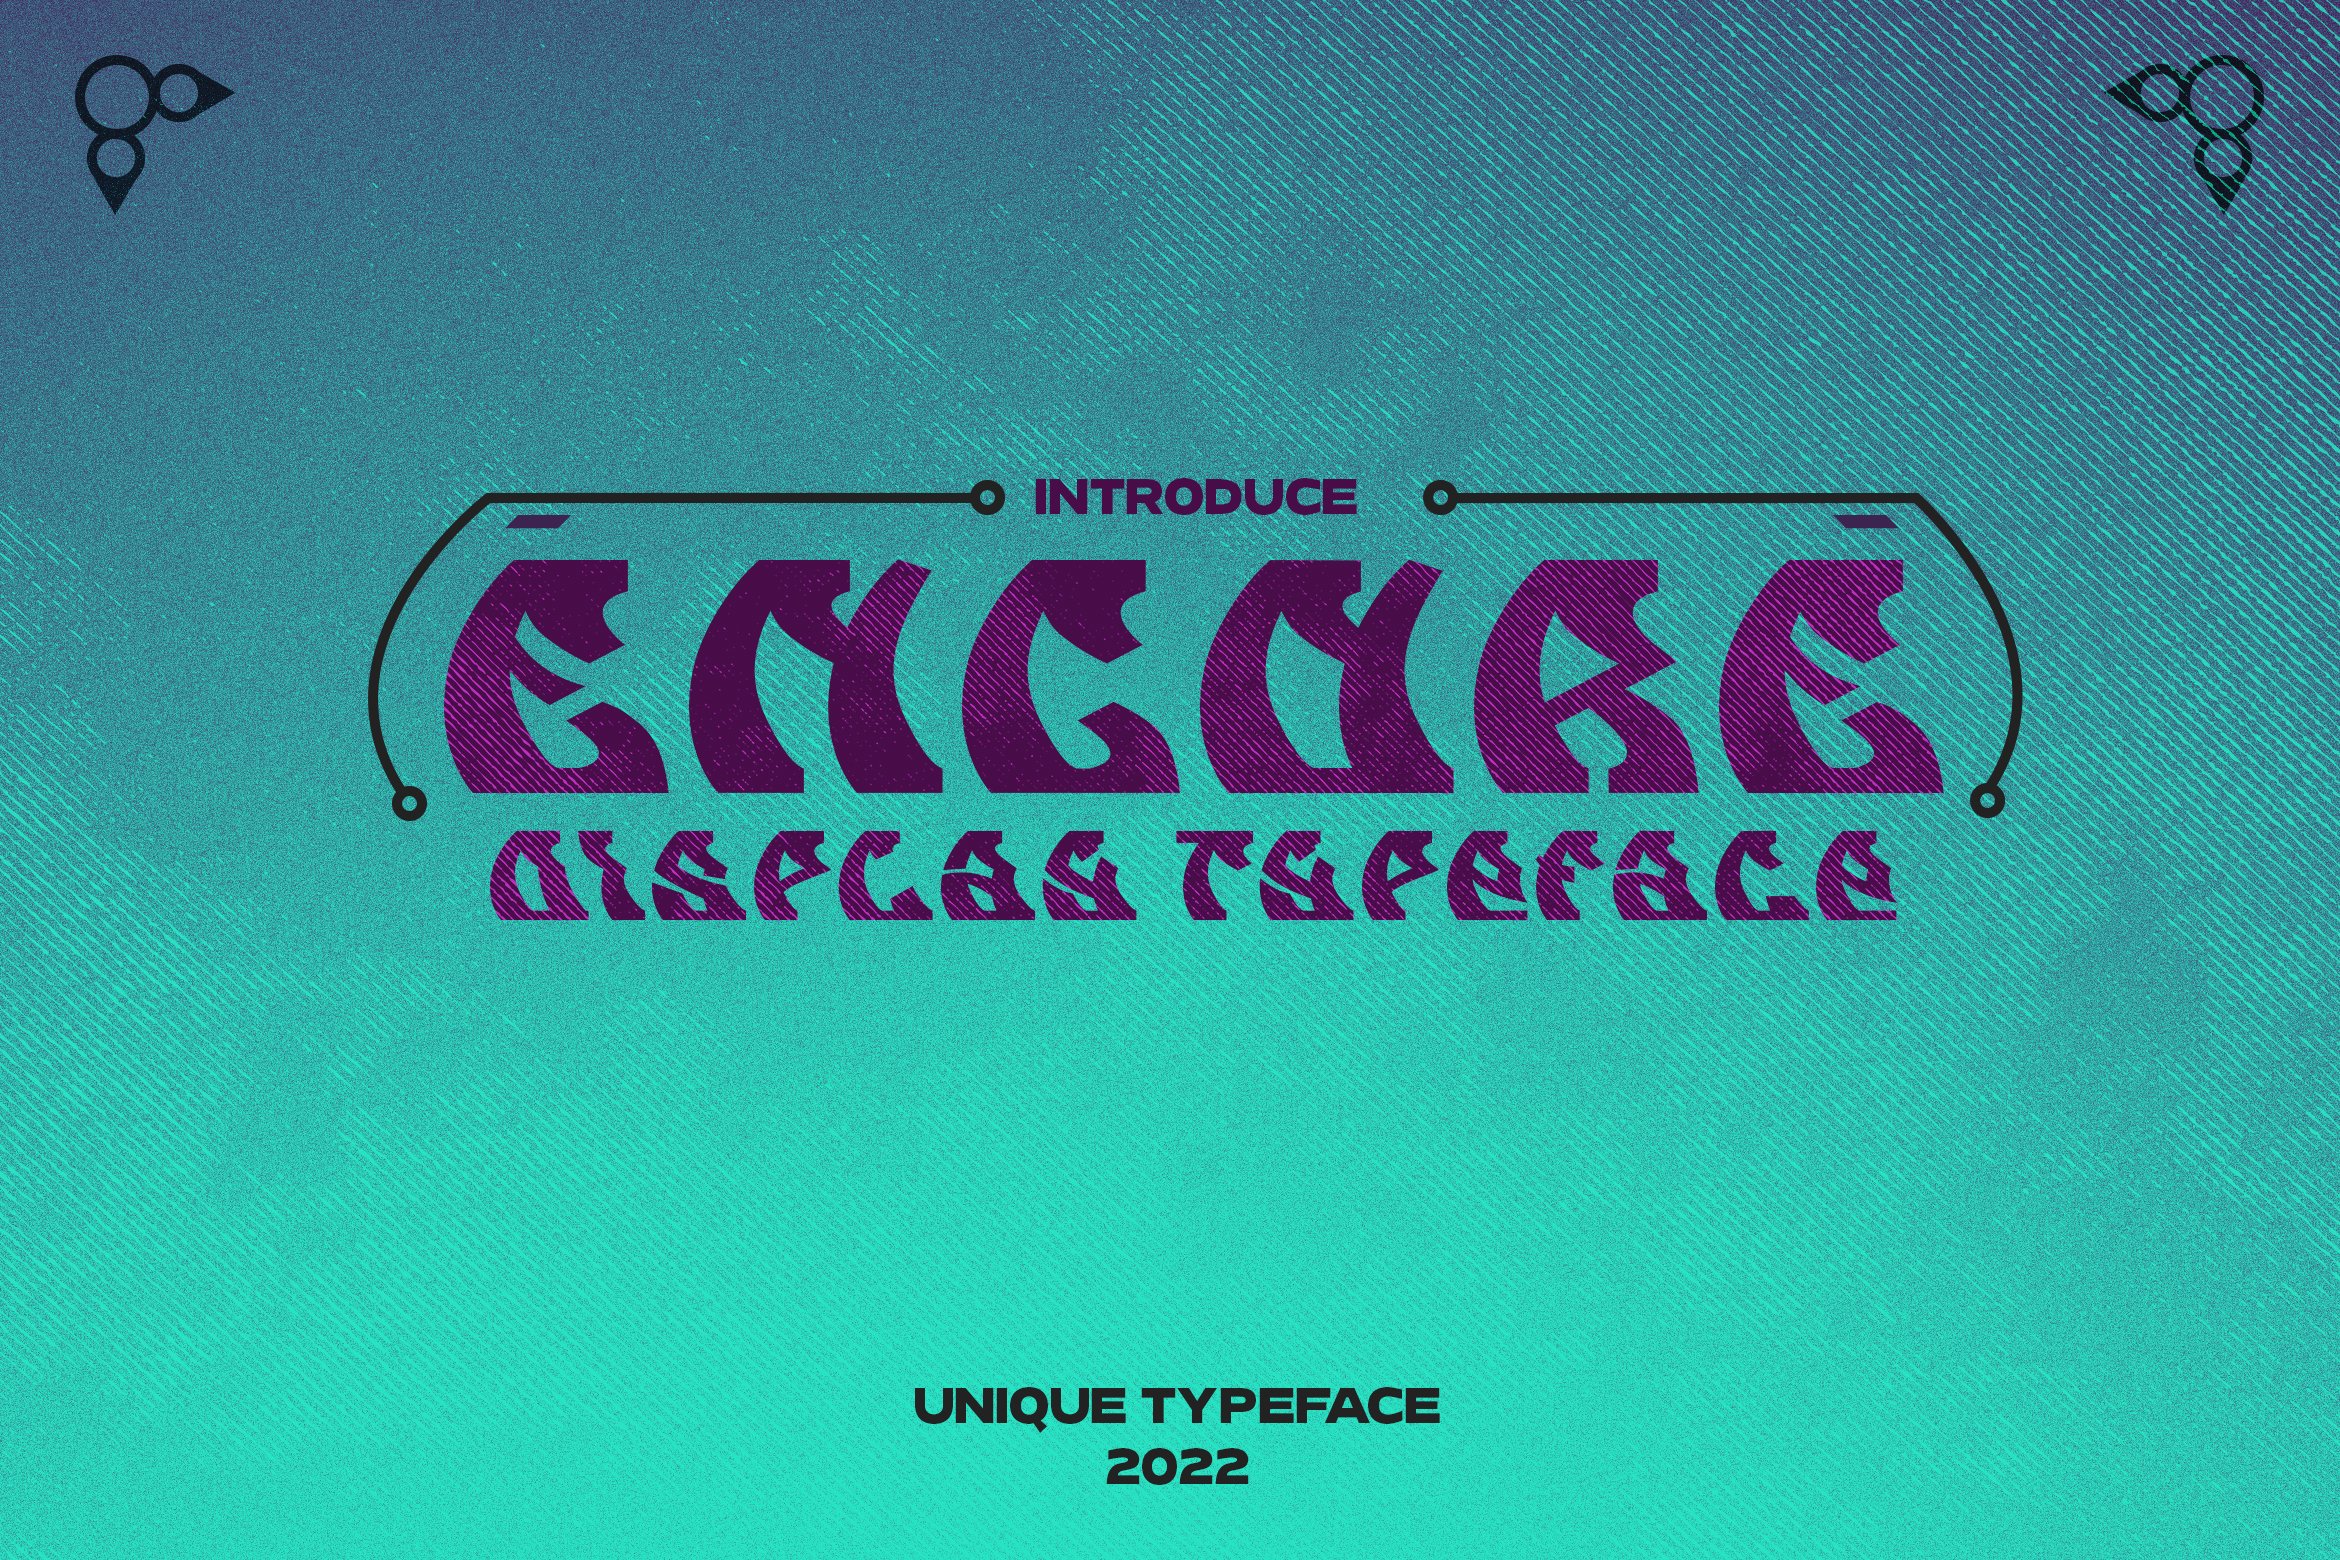 Encore - Display Typeface cover image.